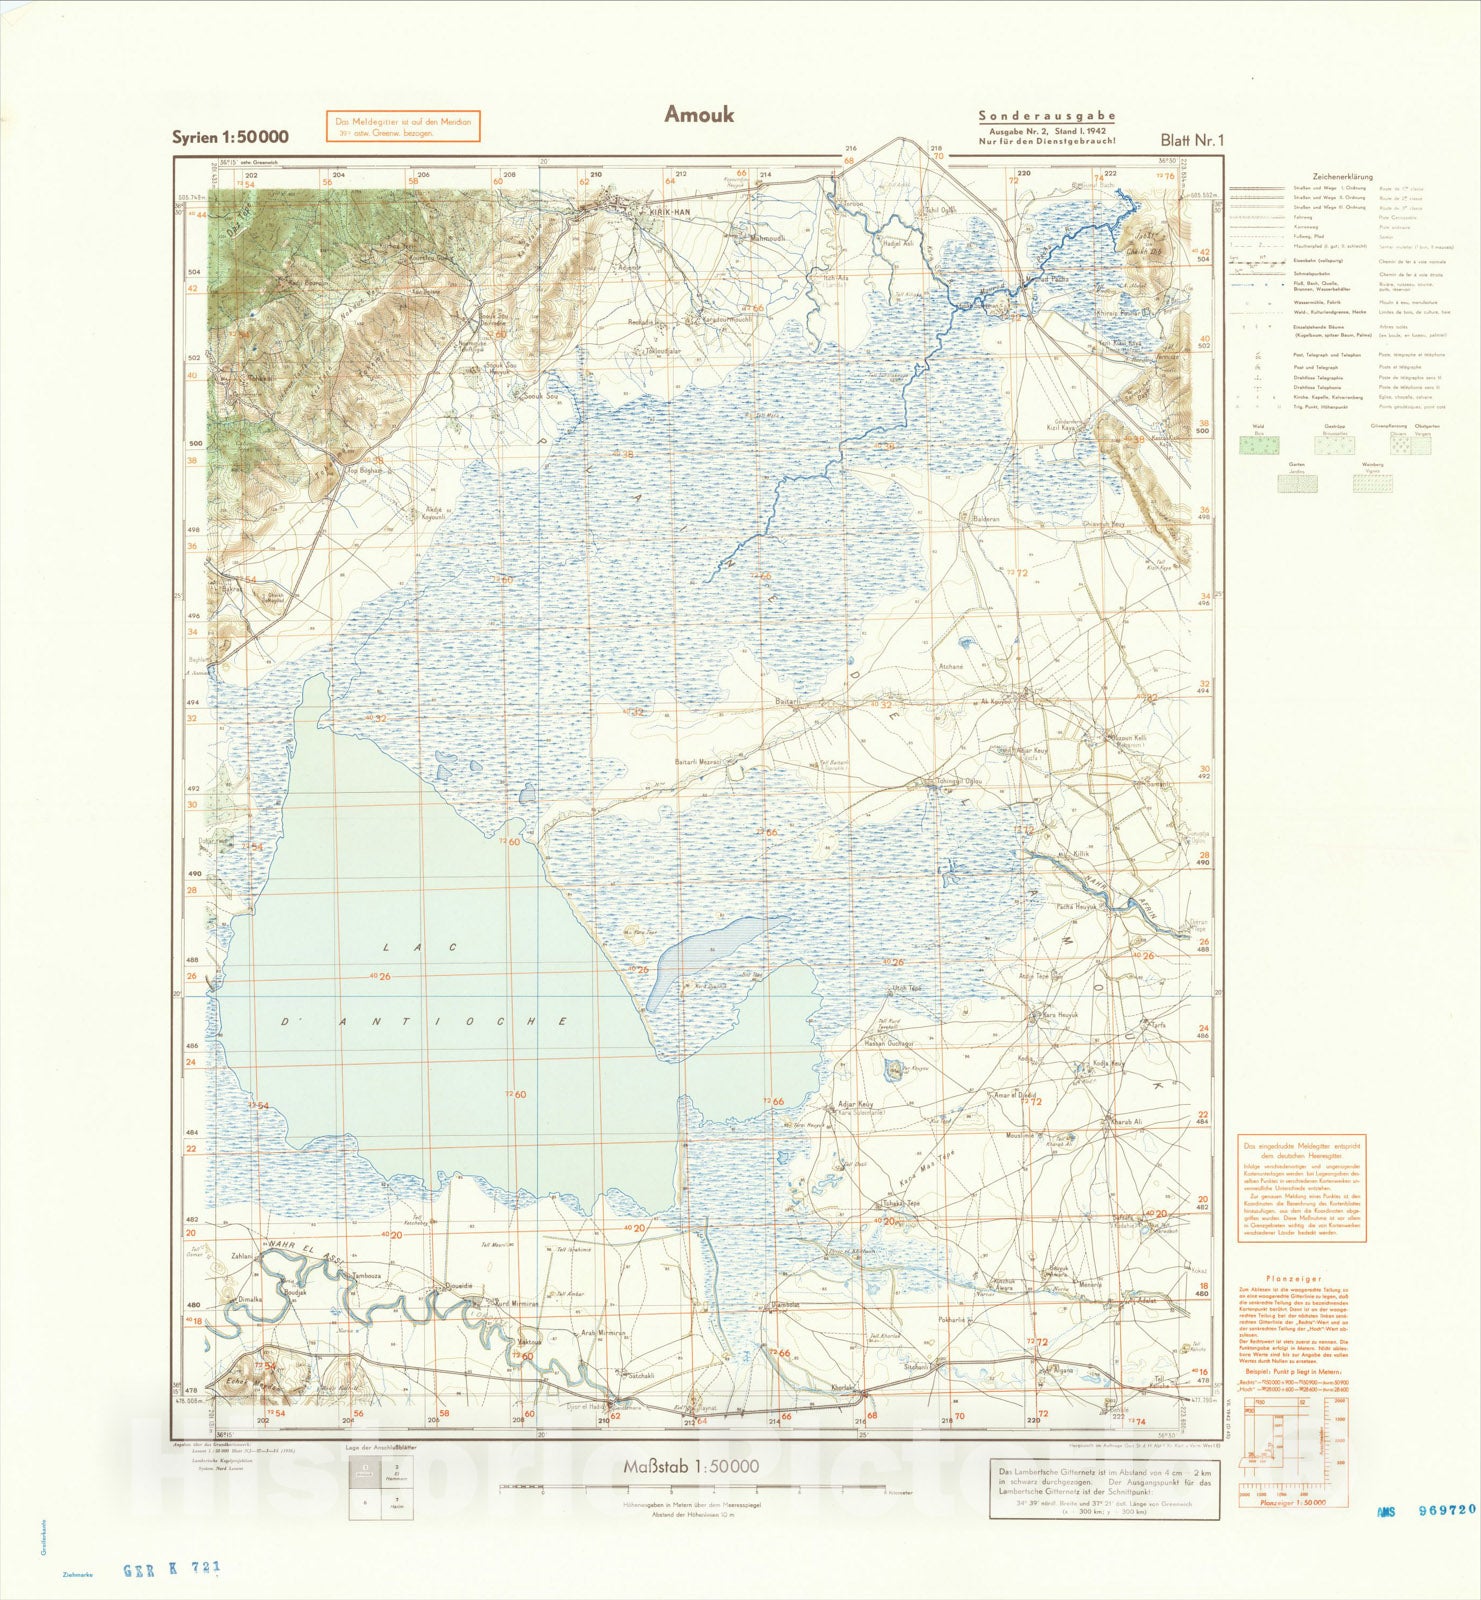 Historic Map : (Second World War - Middle East) Syrien 1:50 000, 1942, General Staff of the German Army, Vintage Wall Art